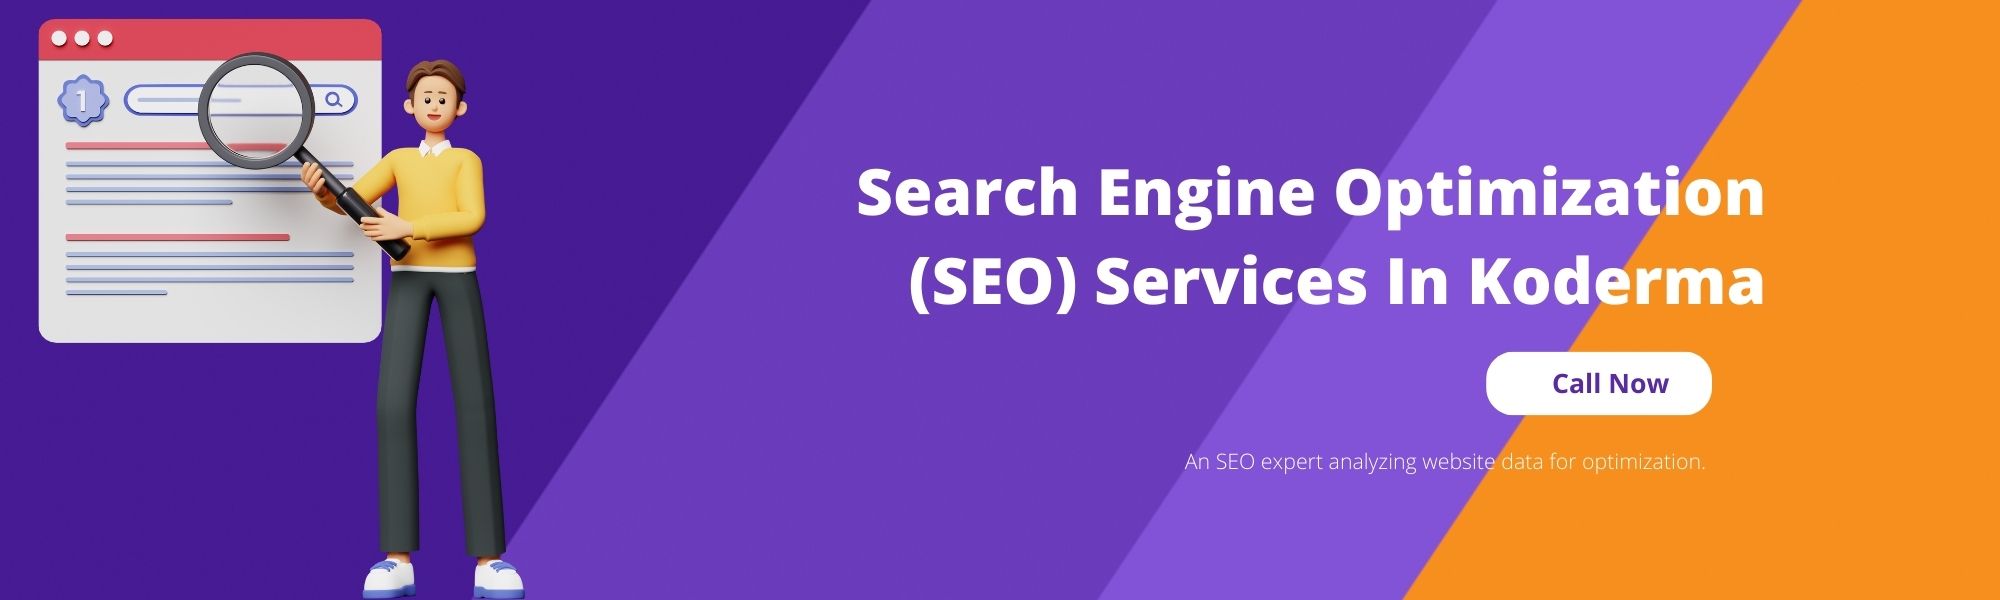 SEO Services in Koderma